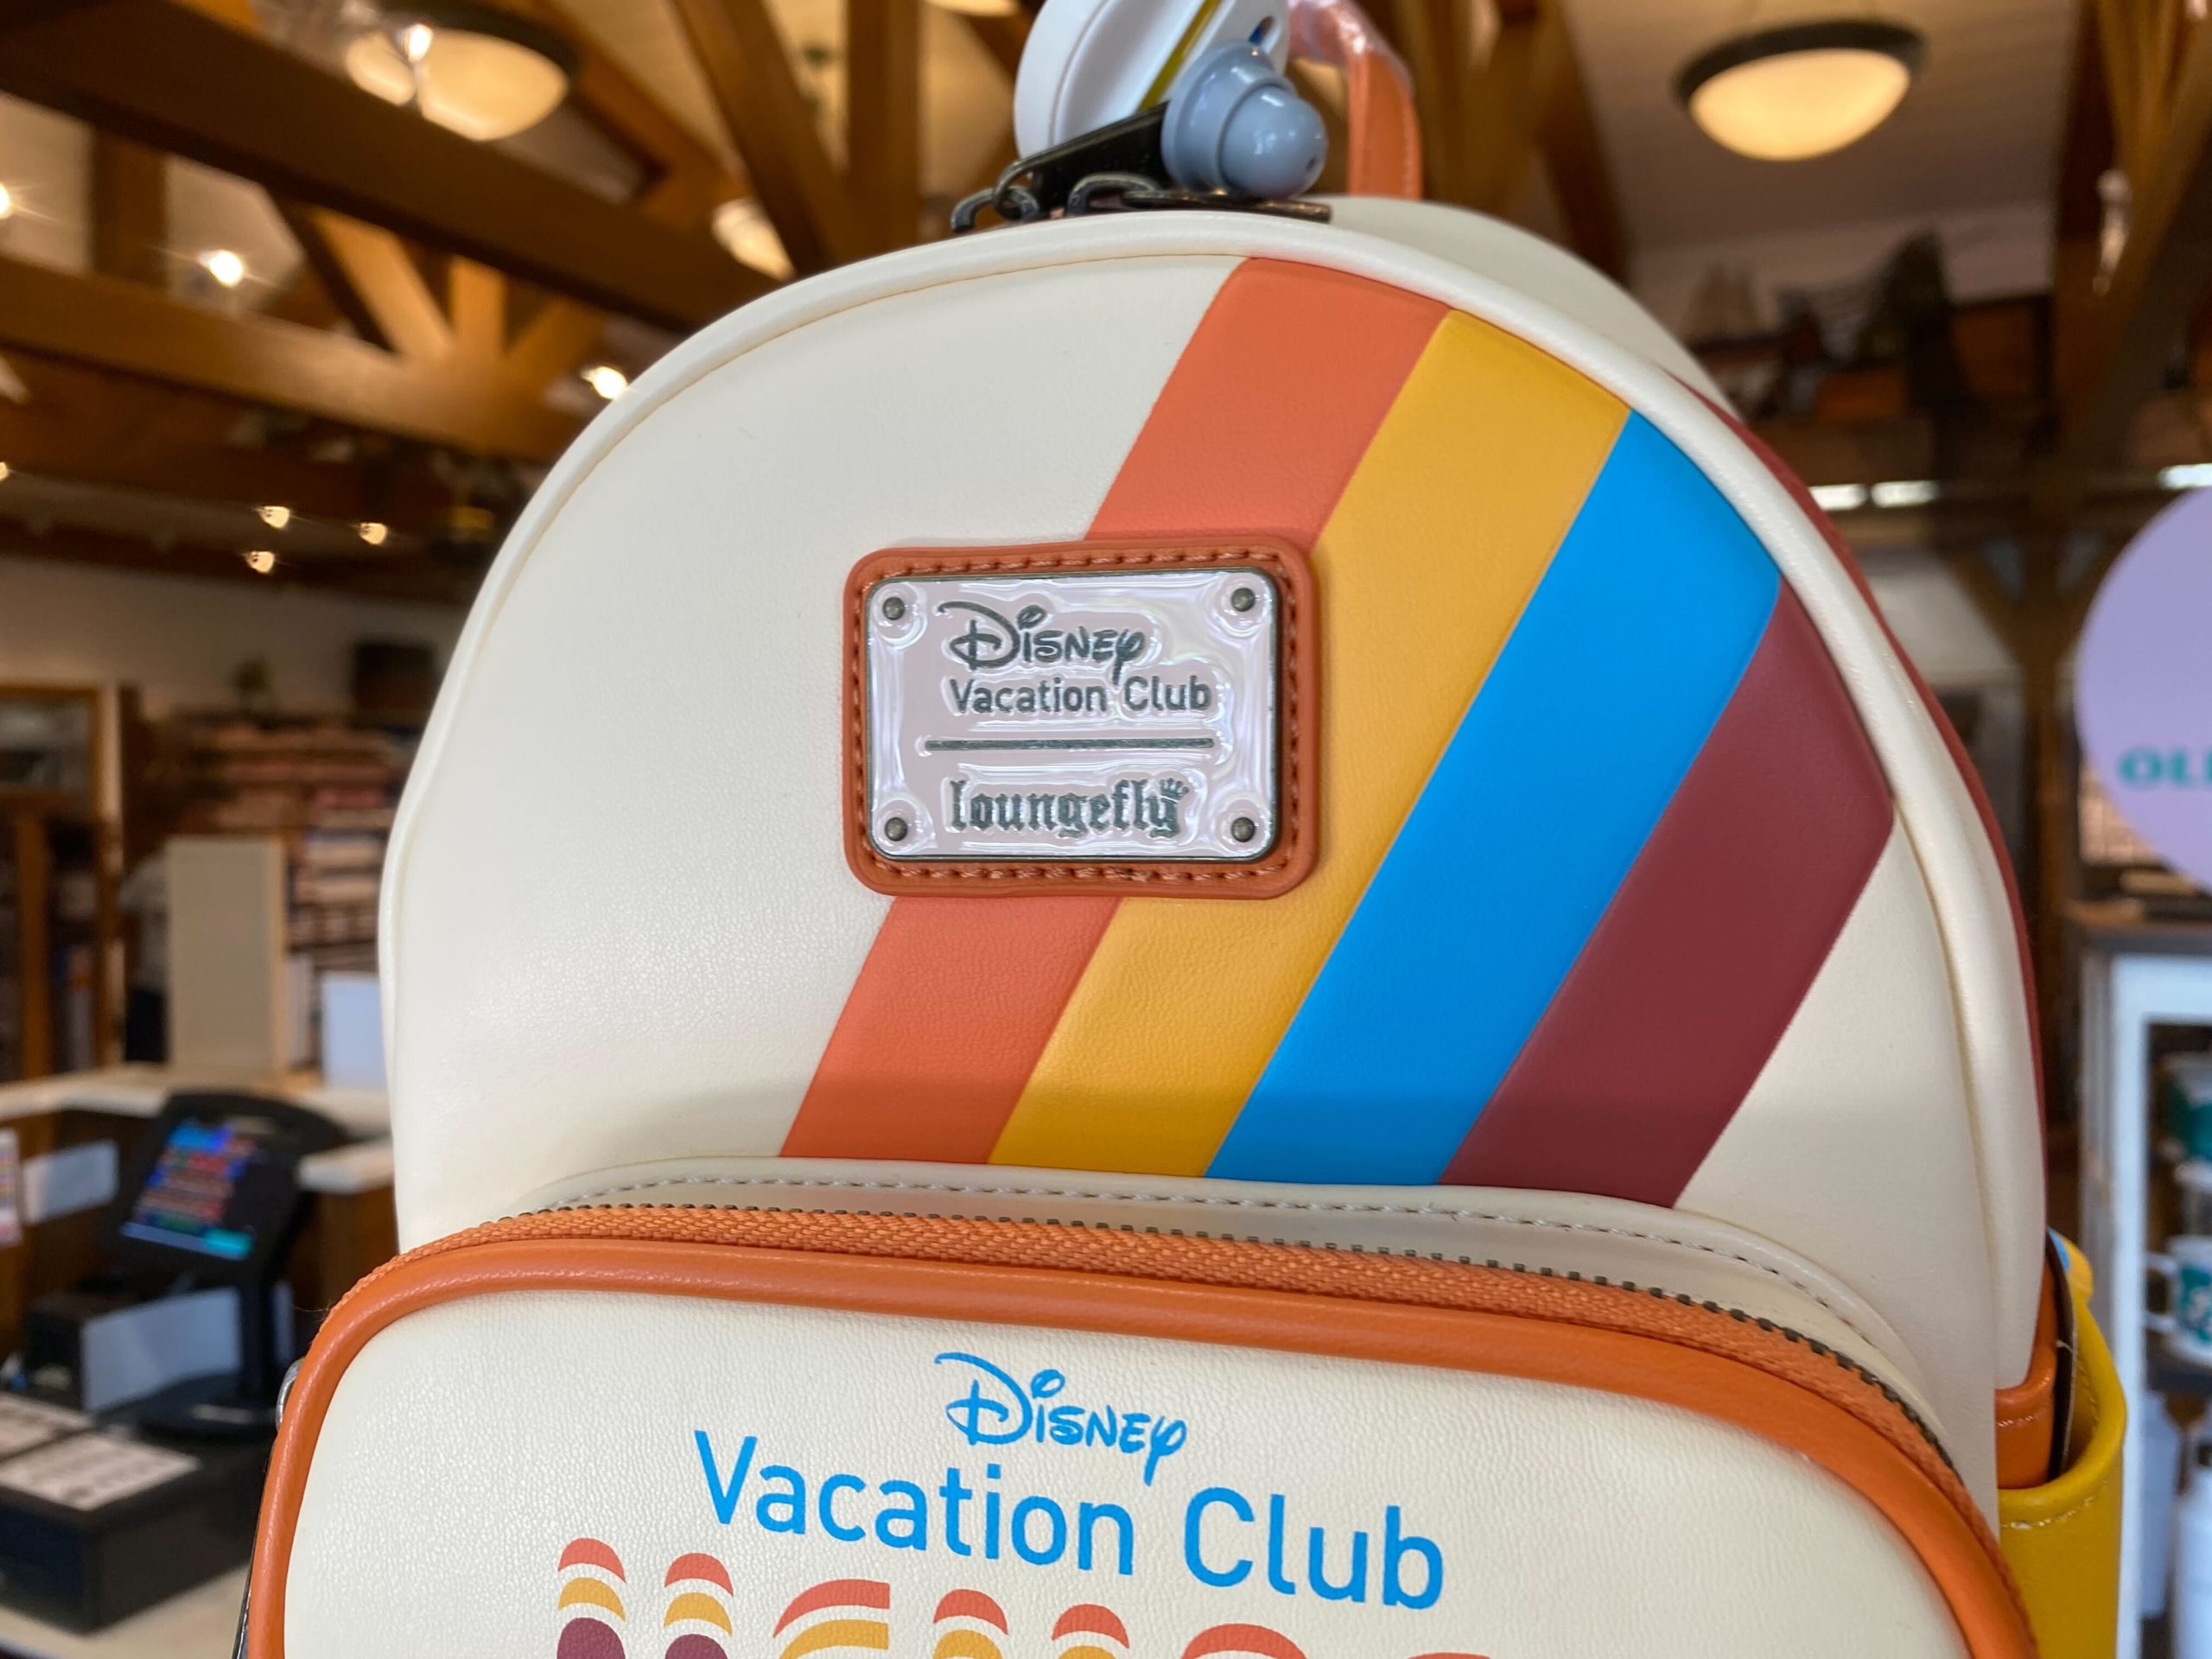 Disney Vacation Club loungefly backpack 2 scaled